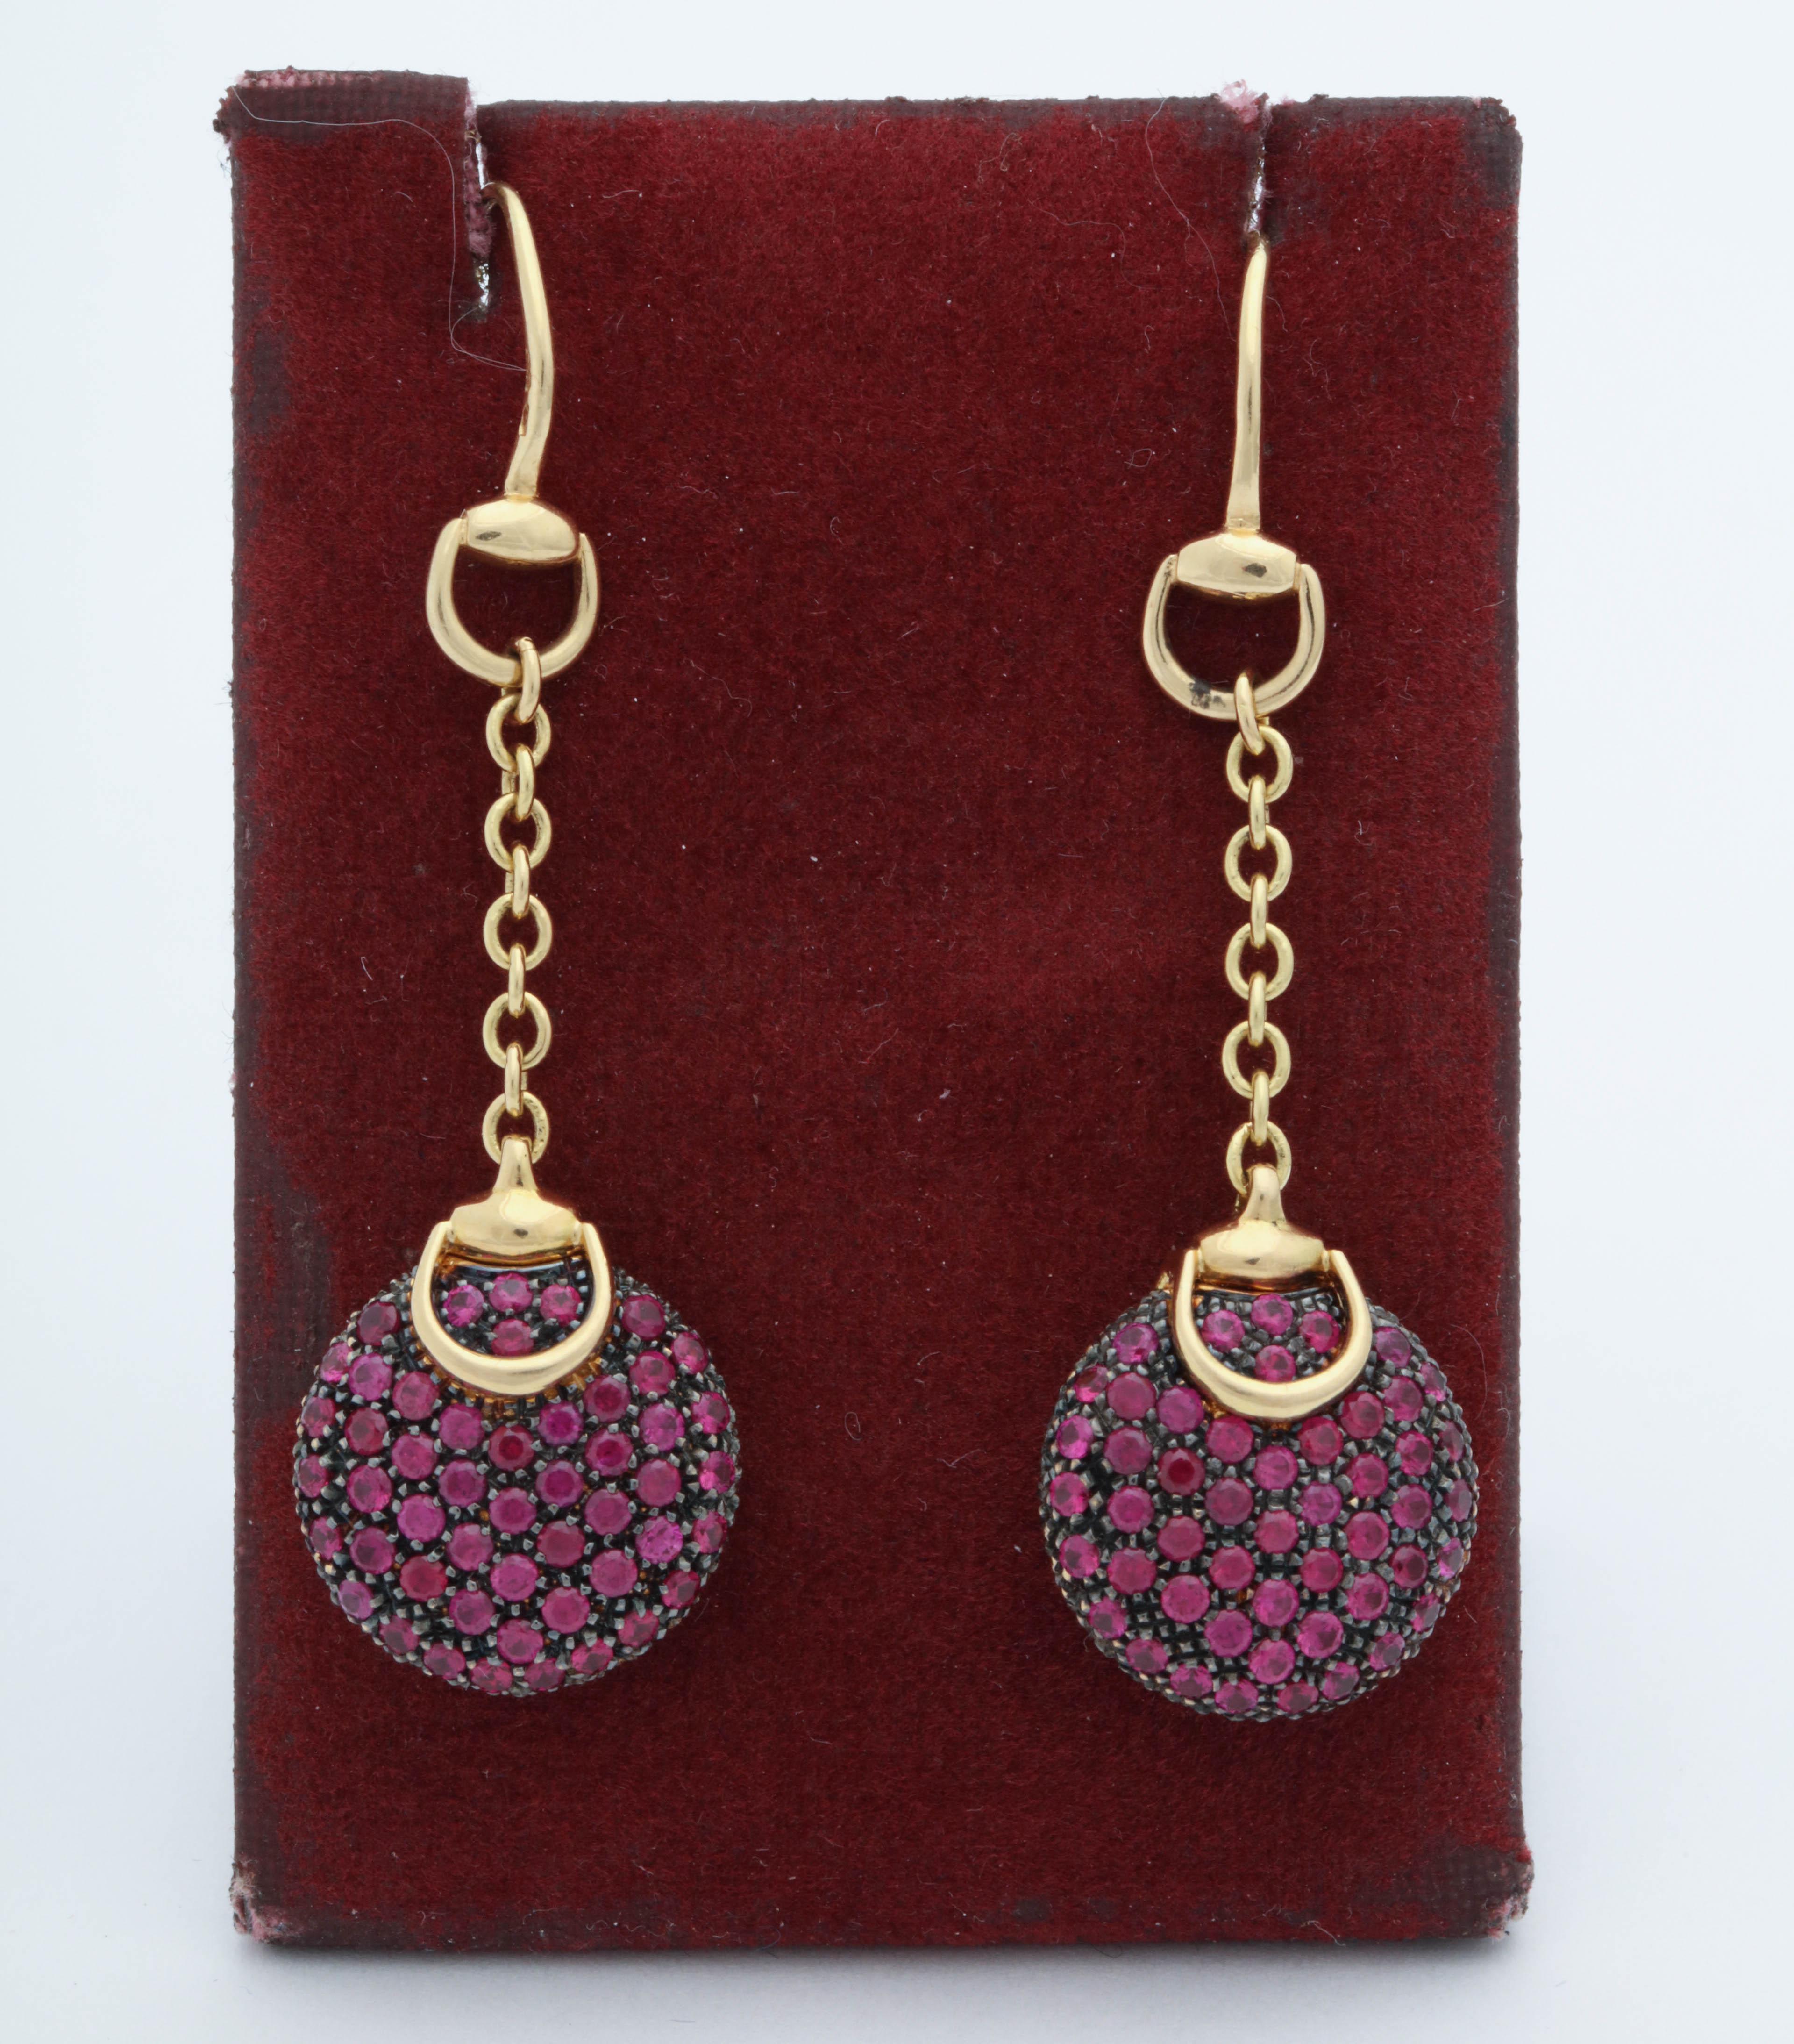 One Pair Of Ladies 18kt Yellow Gold Pendant Drop Earrings Embellished With Numerous Faceted Rubies Weighing Approximately 3 Carats Total Weight. Beautifully Designed With Gucci's Signature Gold Stirrups Craftmanship. NOTE: For Pierced Ears Only.